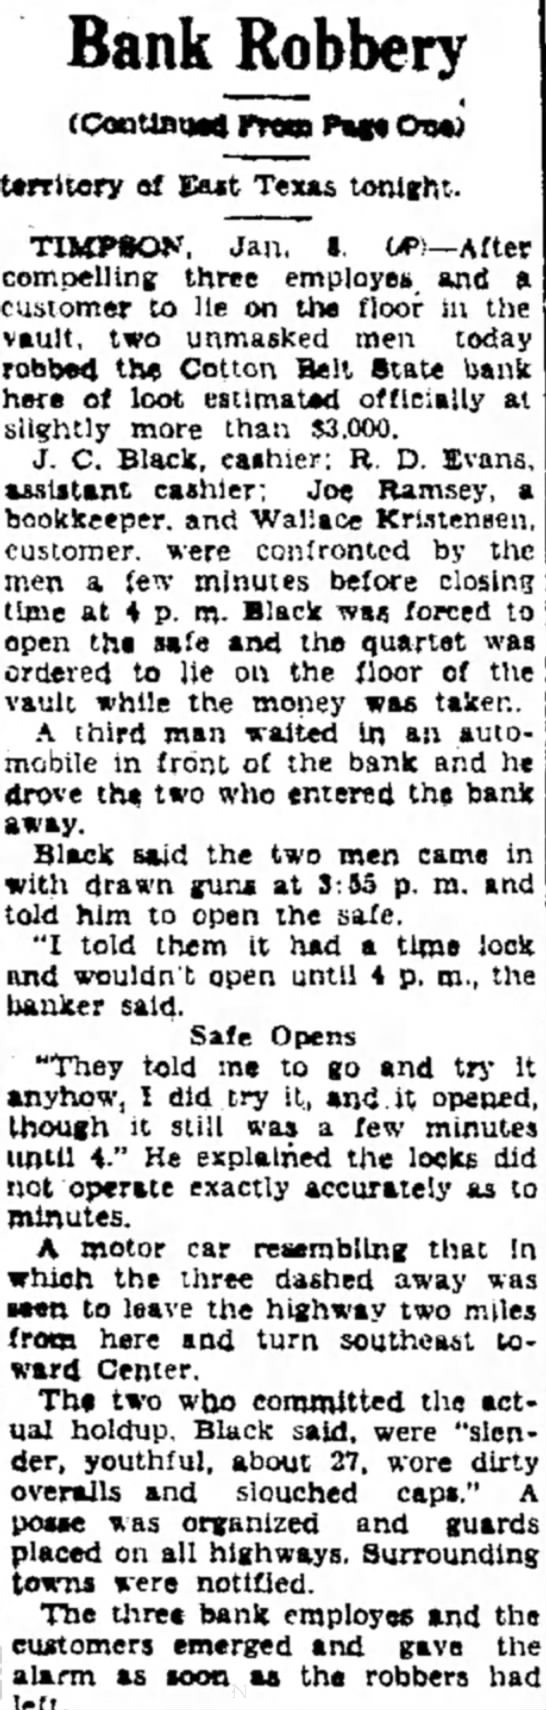 Timpson Band Robbed
Lubbock Morning Avalanche 1/9/31